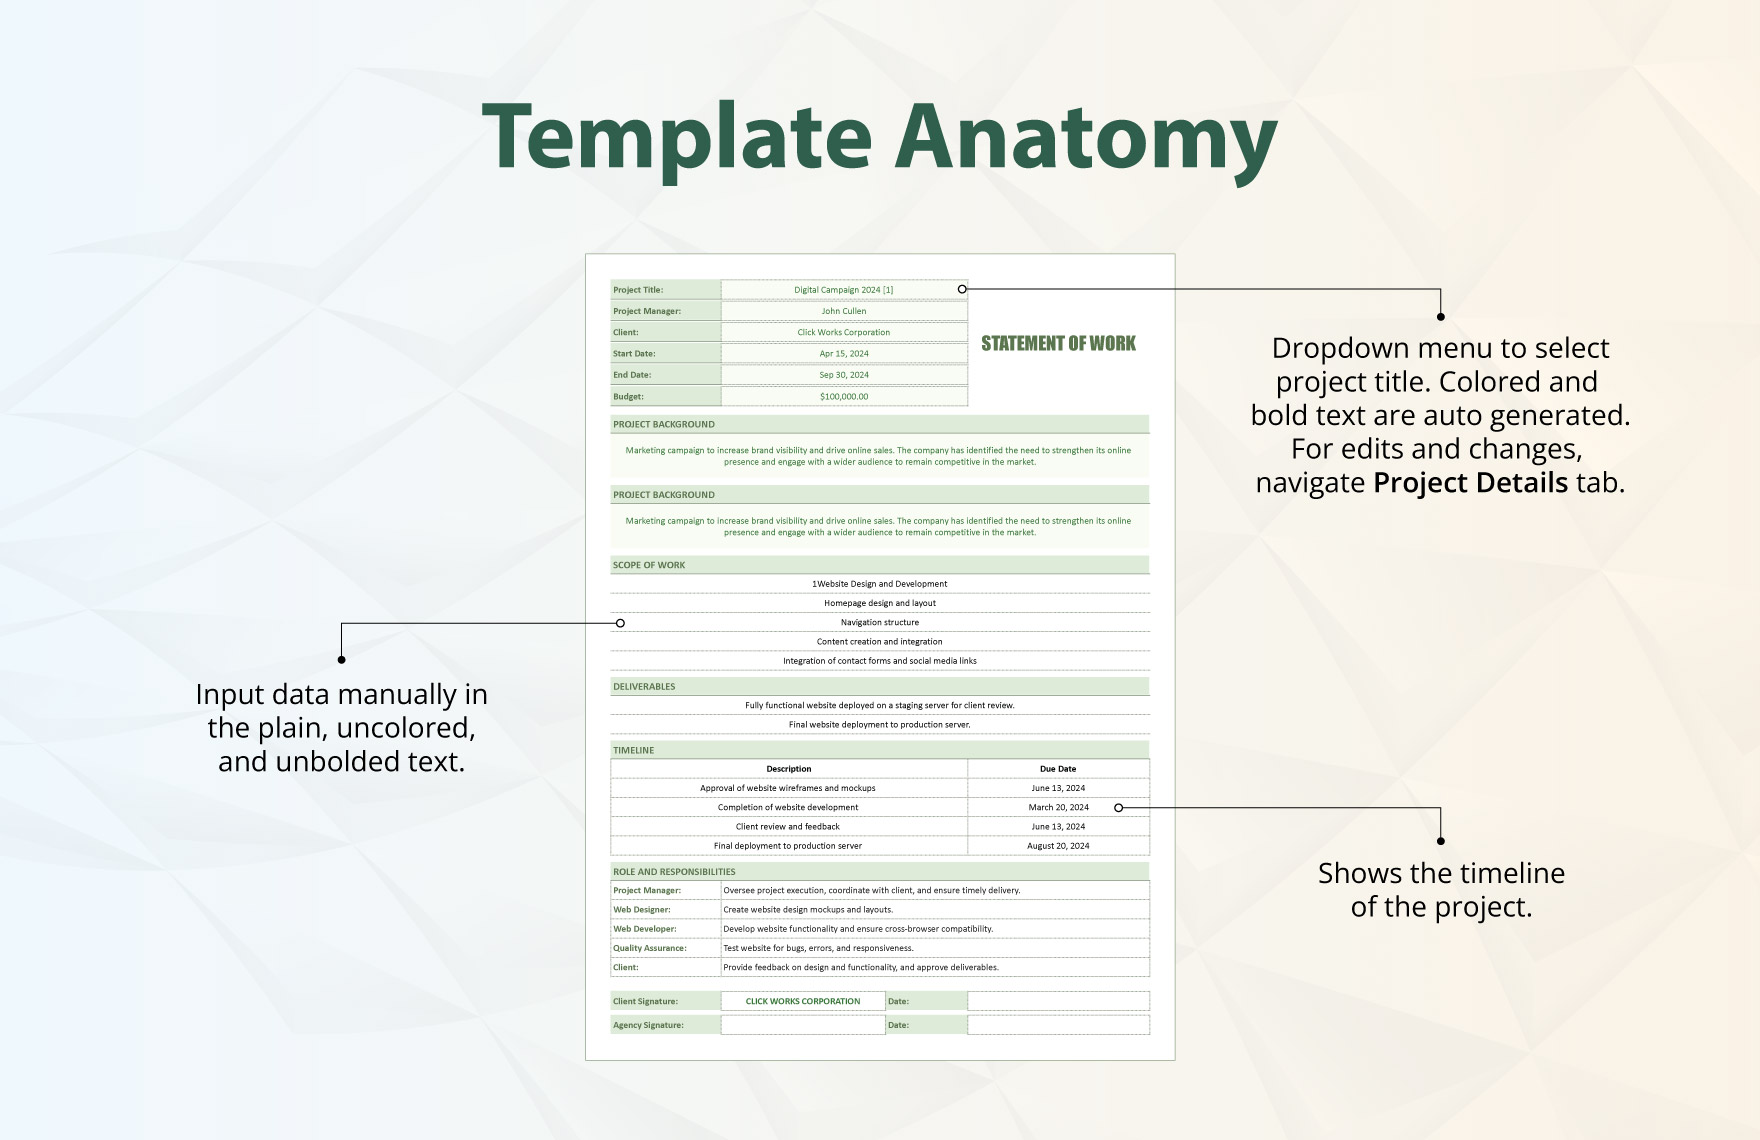 Sample Statement of Work Template